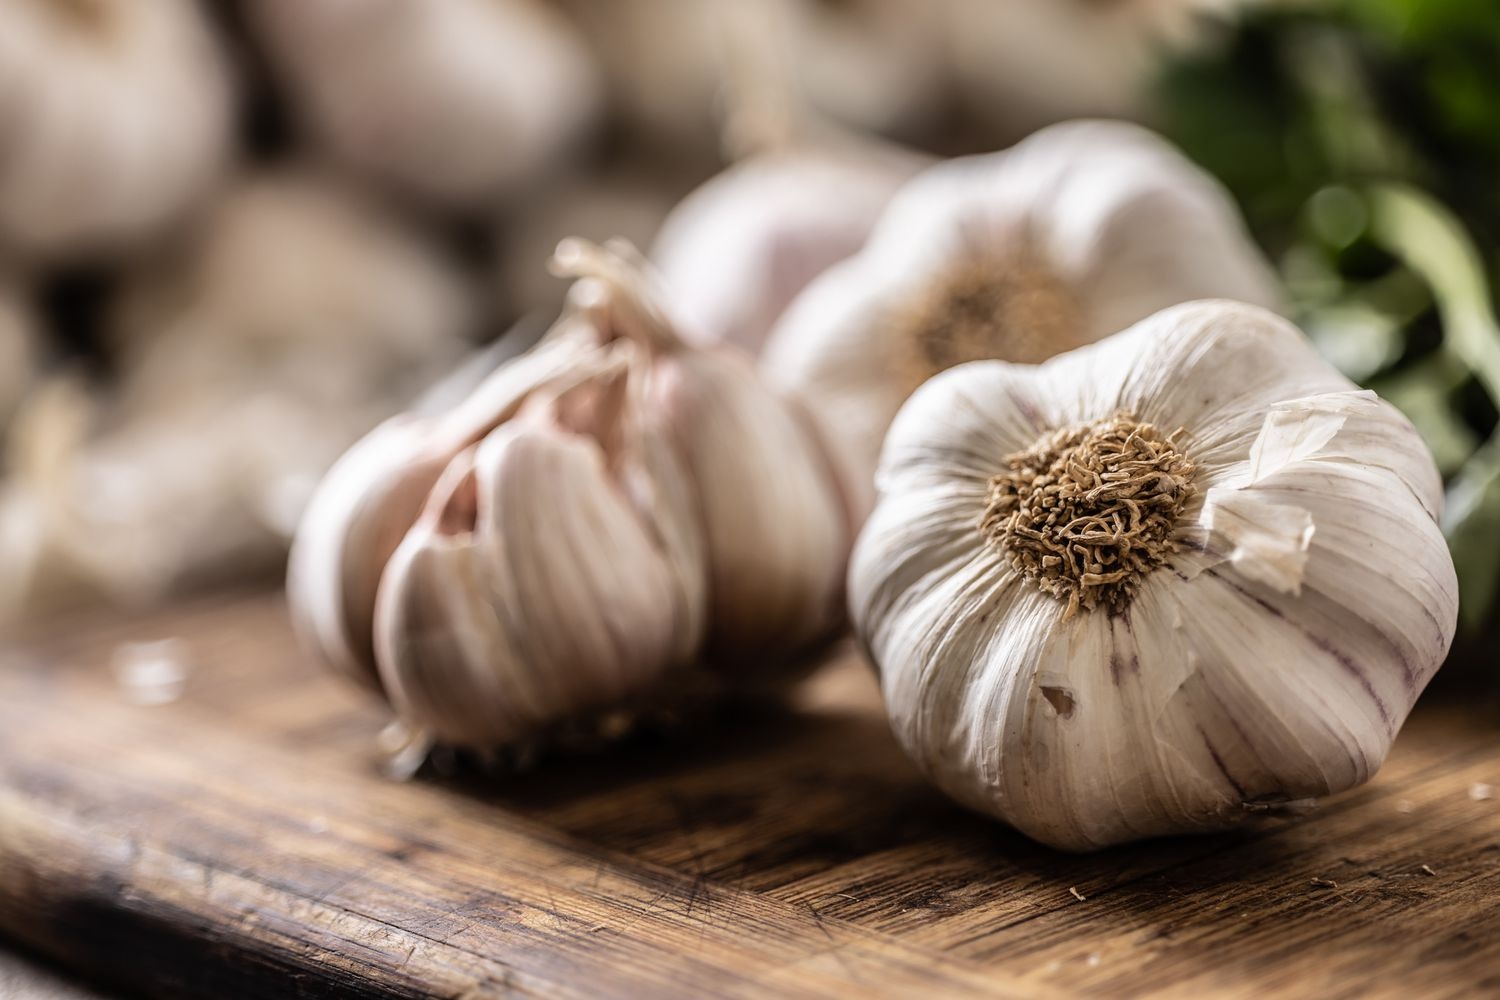 Know Benefits of Garlic for Heart Health and what not!